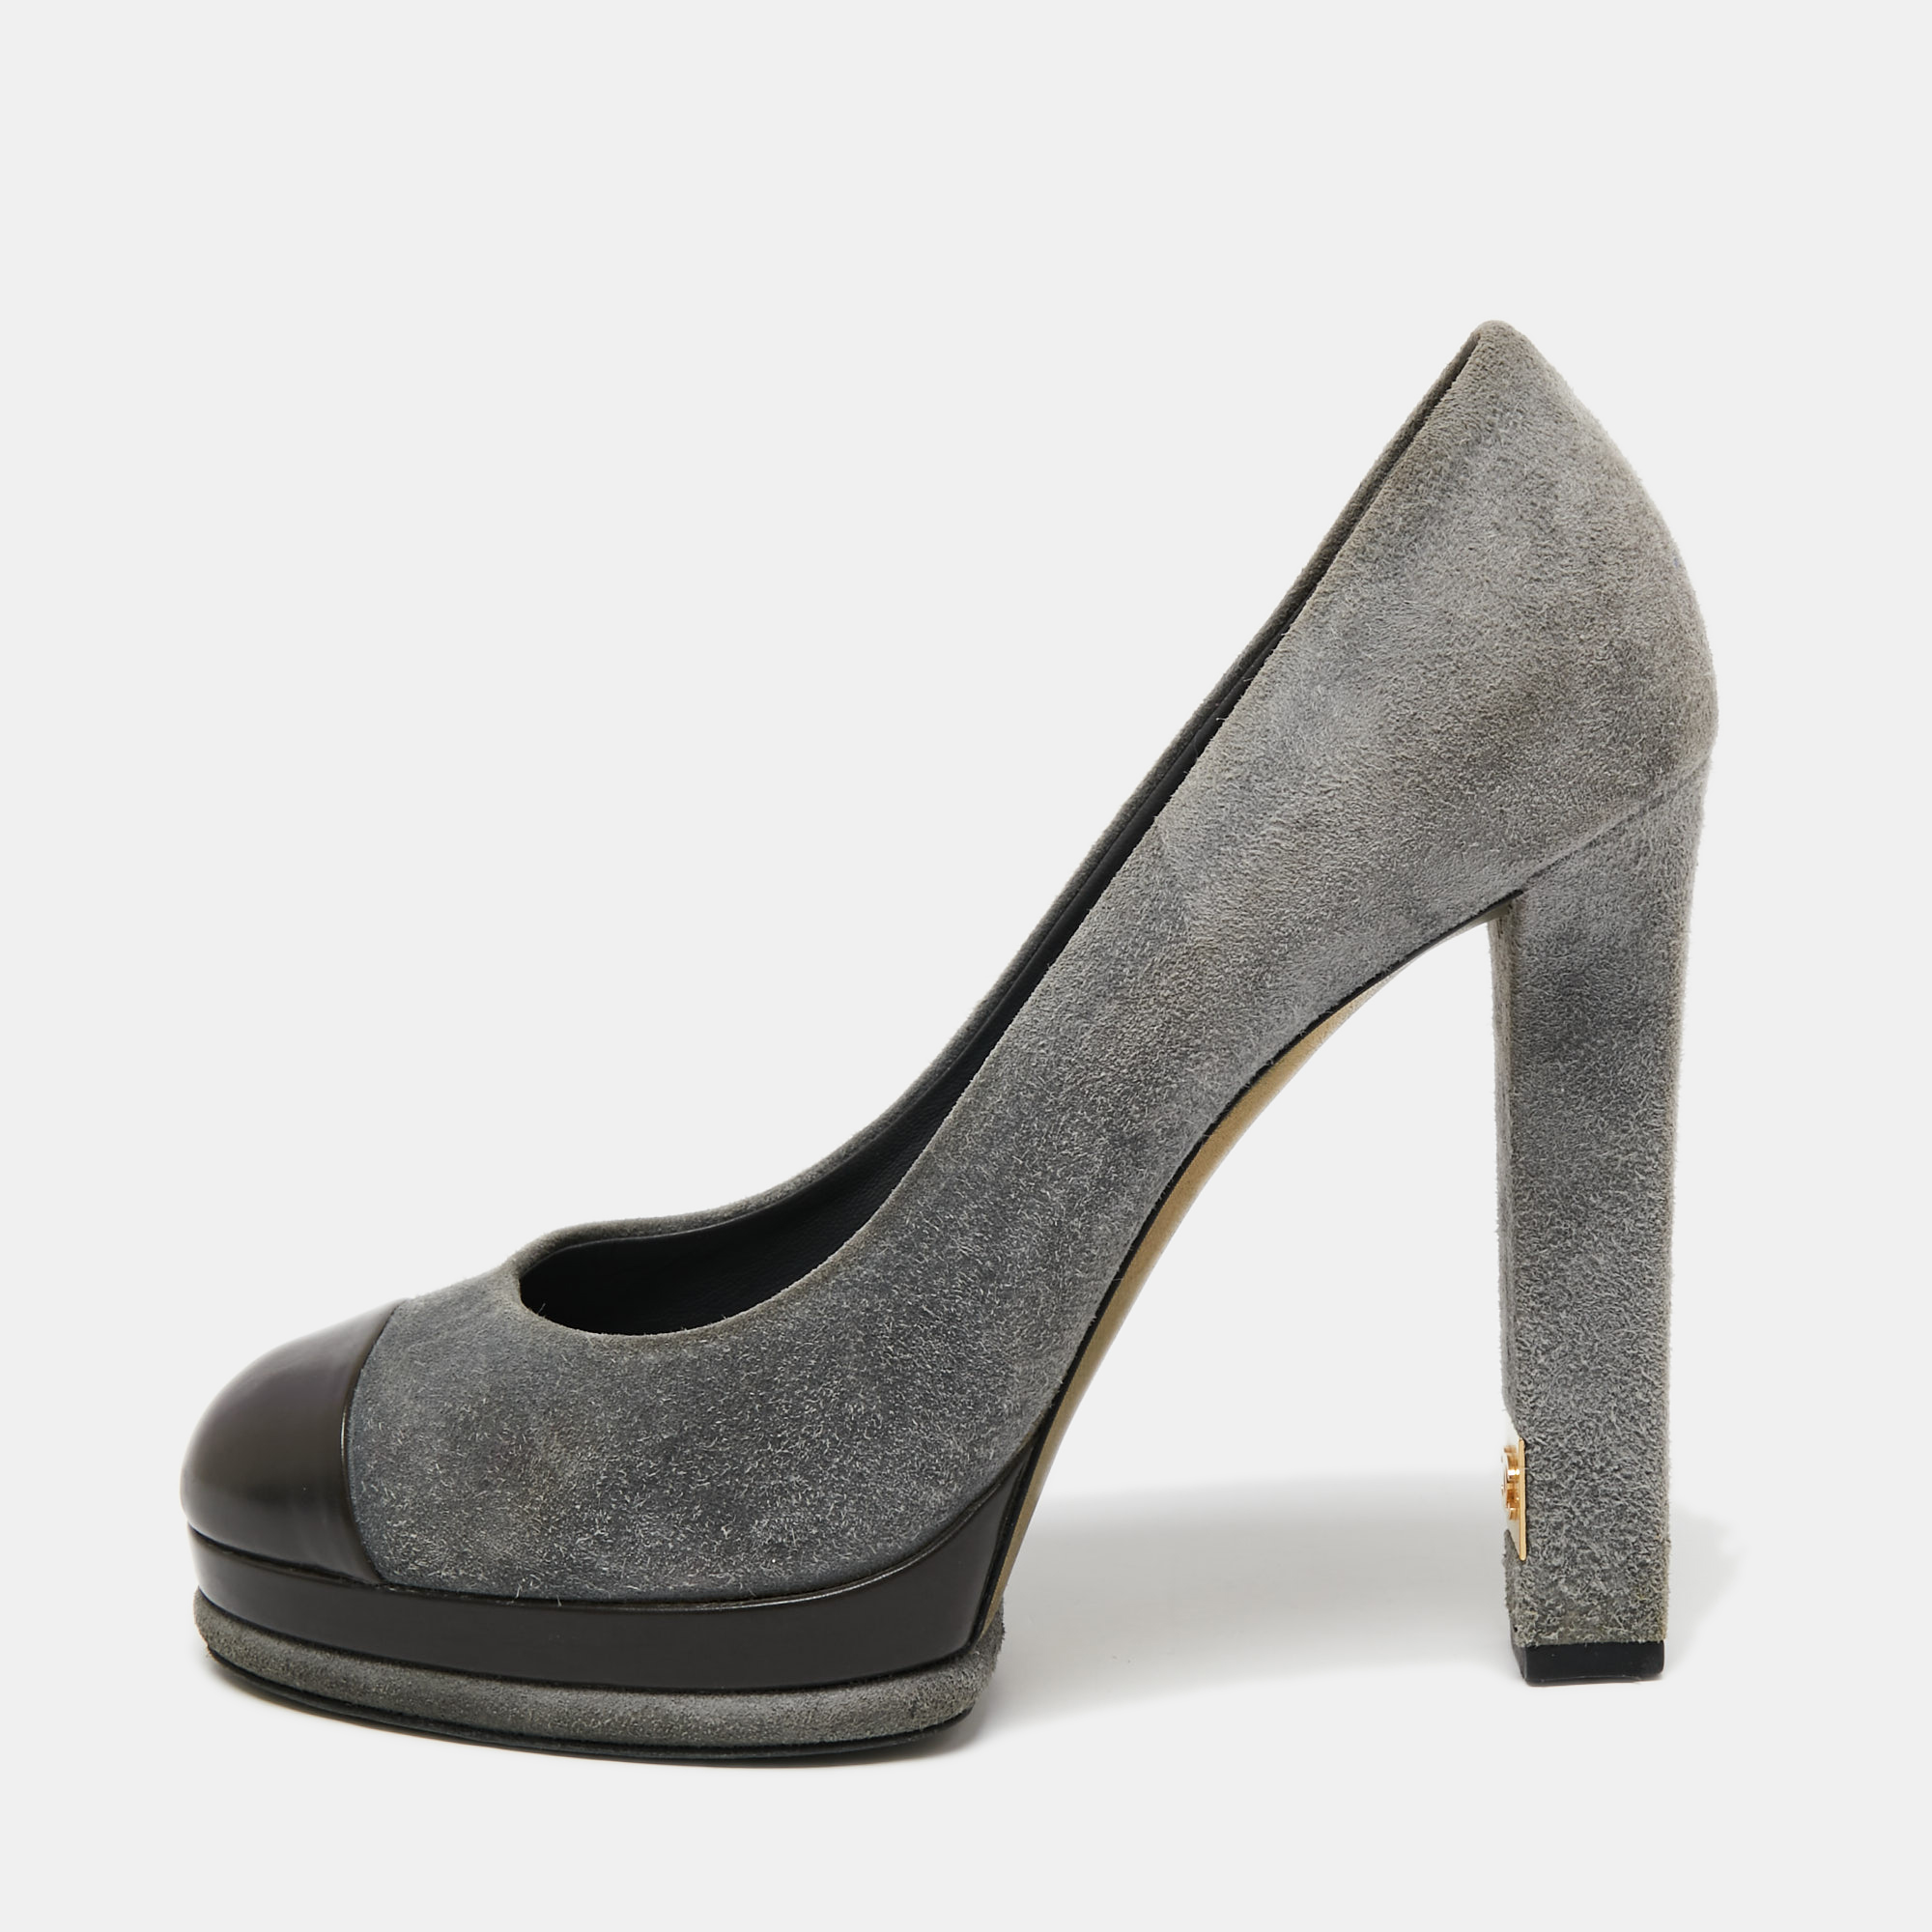 This pair of Chanel pumps is the epitome of sophistication and feminine style. Crafted from suede and leather it is equipped with contrasting cap toes and its branded heels are mounted on platforms to lend you the required support.